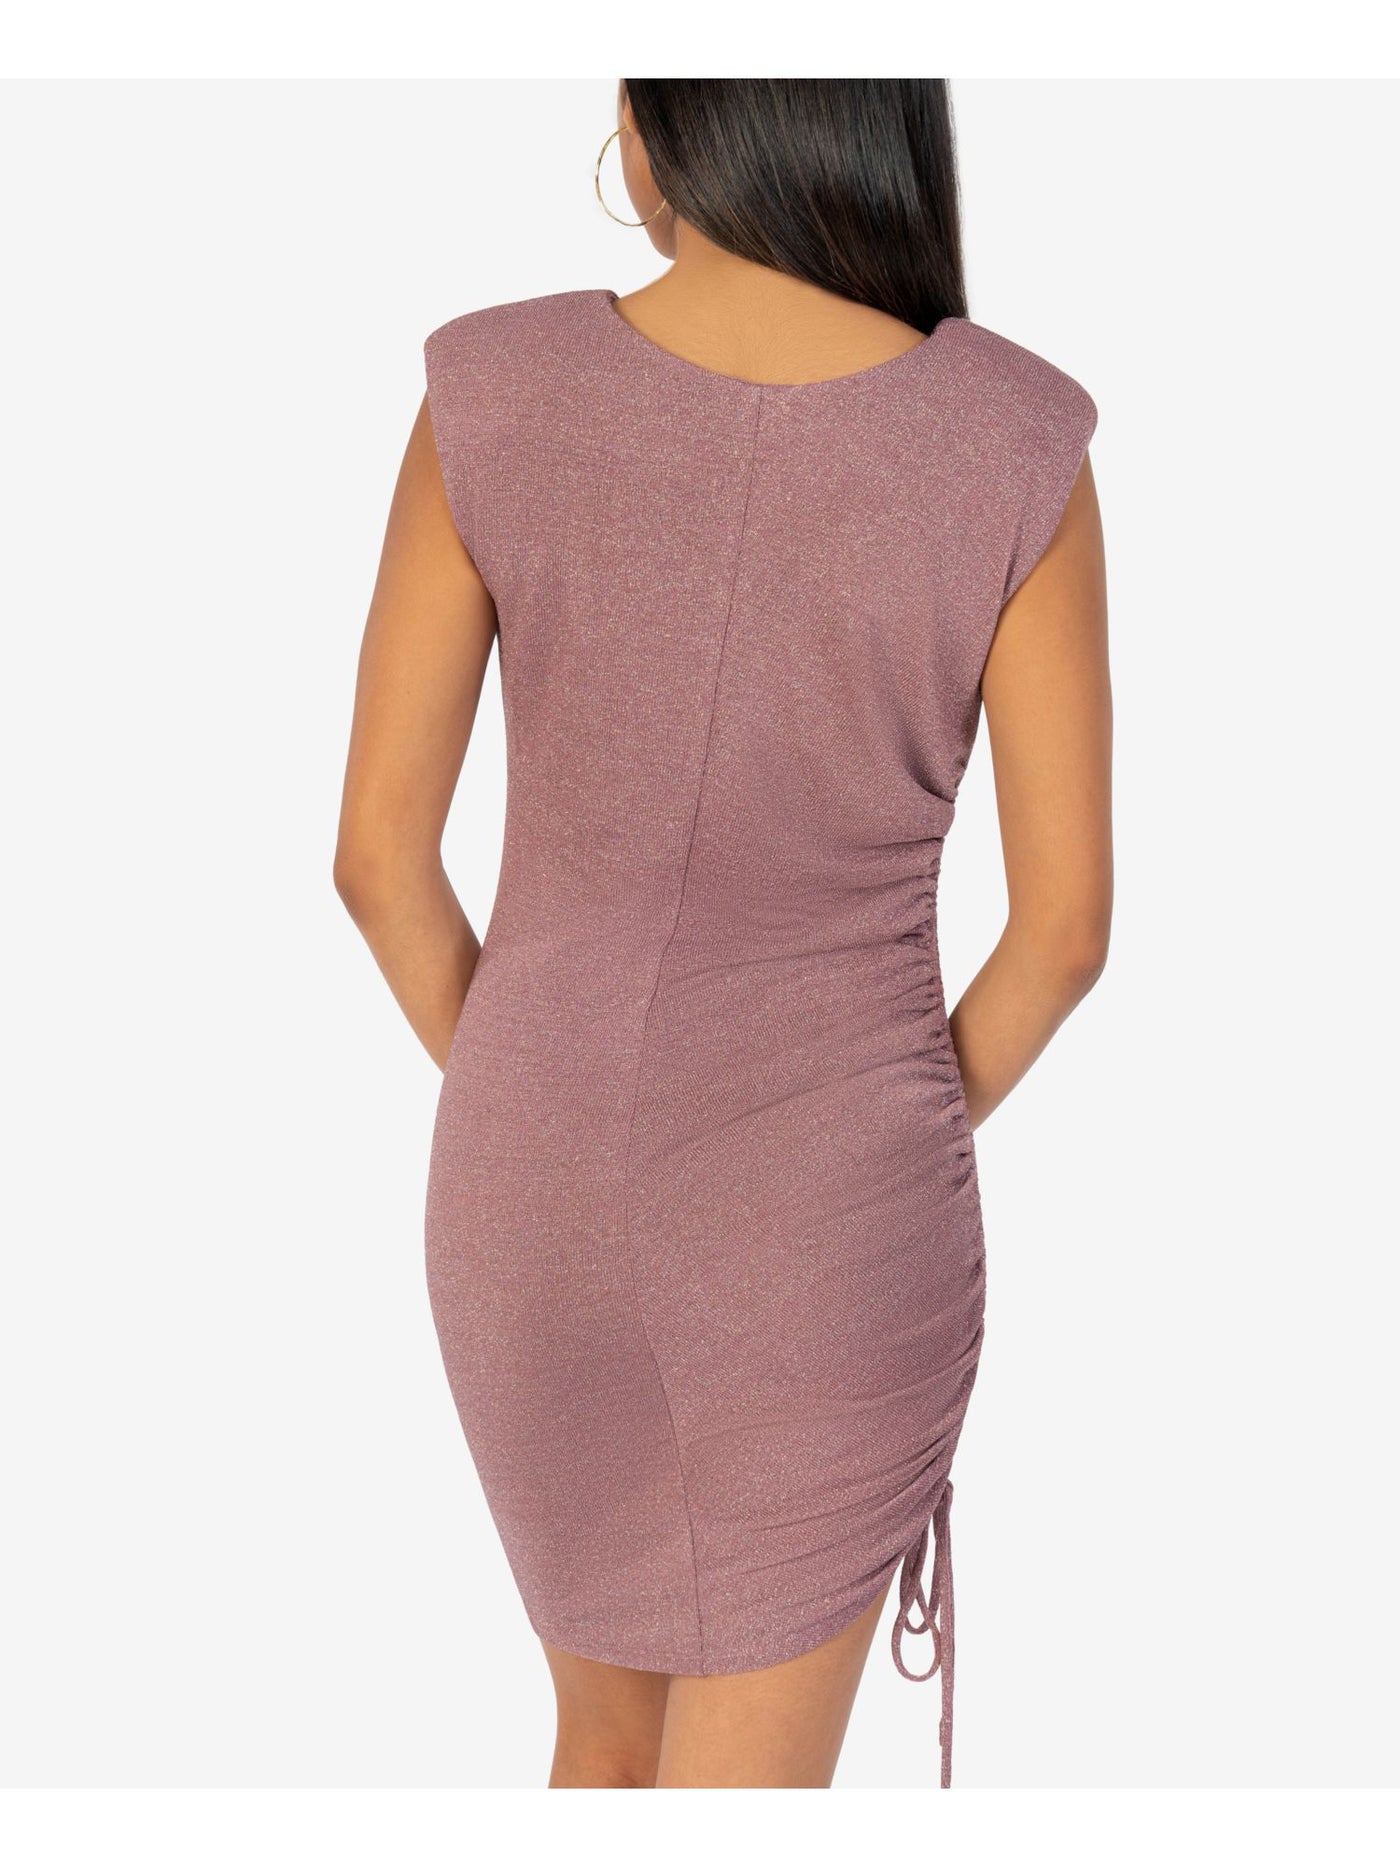 SPEECHLESS Womens Purple Knit Metallic Tie Side-Ruched Sleeveless Round Neck Short Cocktail Body Con Dress Juniors L